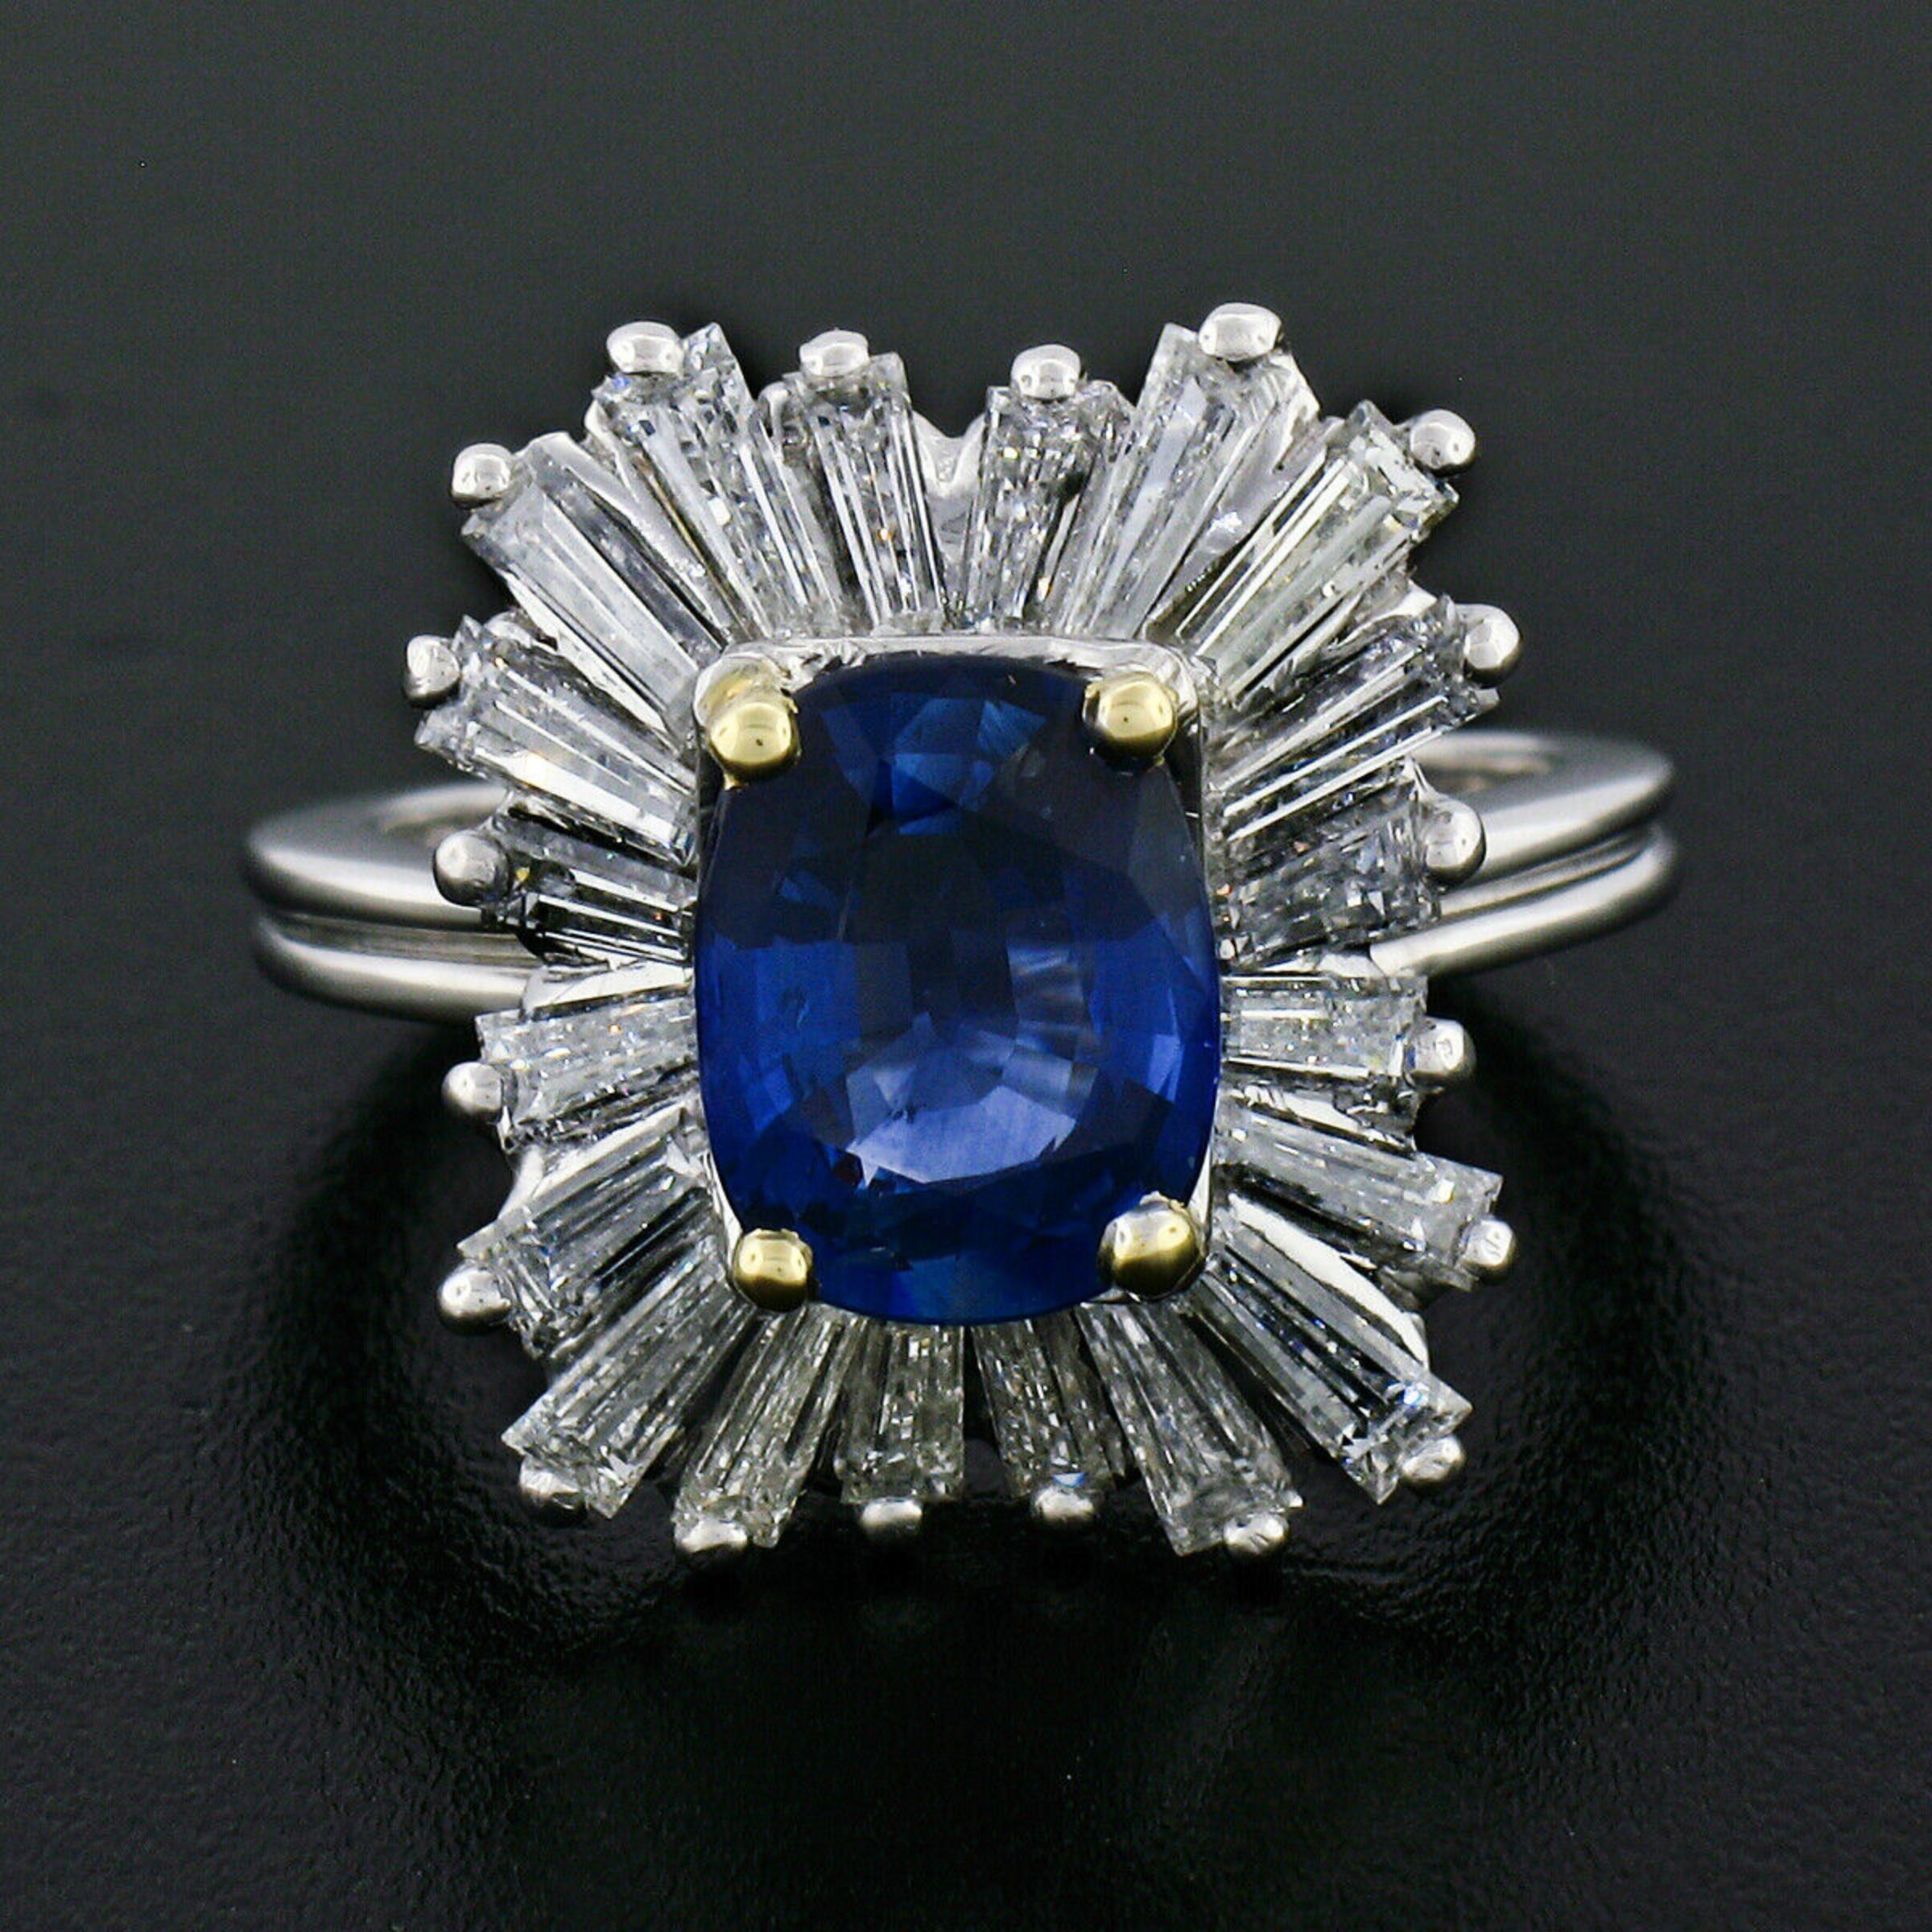 This absolutely stunning, ballerina style ring is very well crafted in solid platinum. It features a magnificent, AGL certified, natural sapphire stone prong set at its center. This sapphire is SUPER FINE quality and has the richest royal blue color